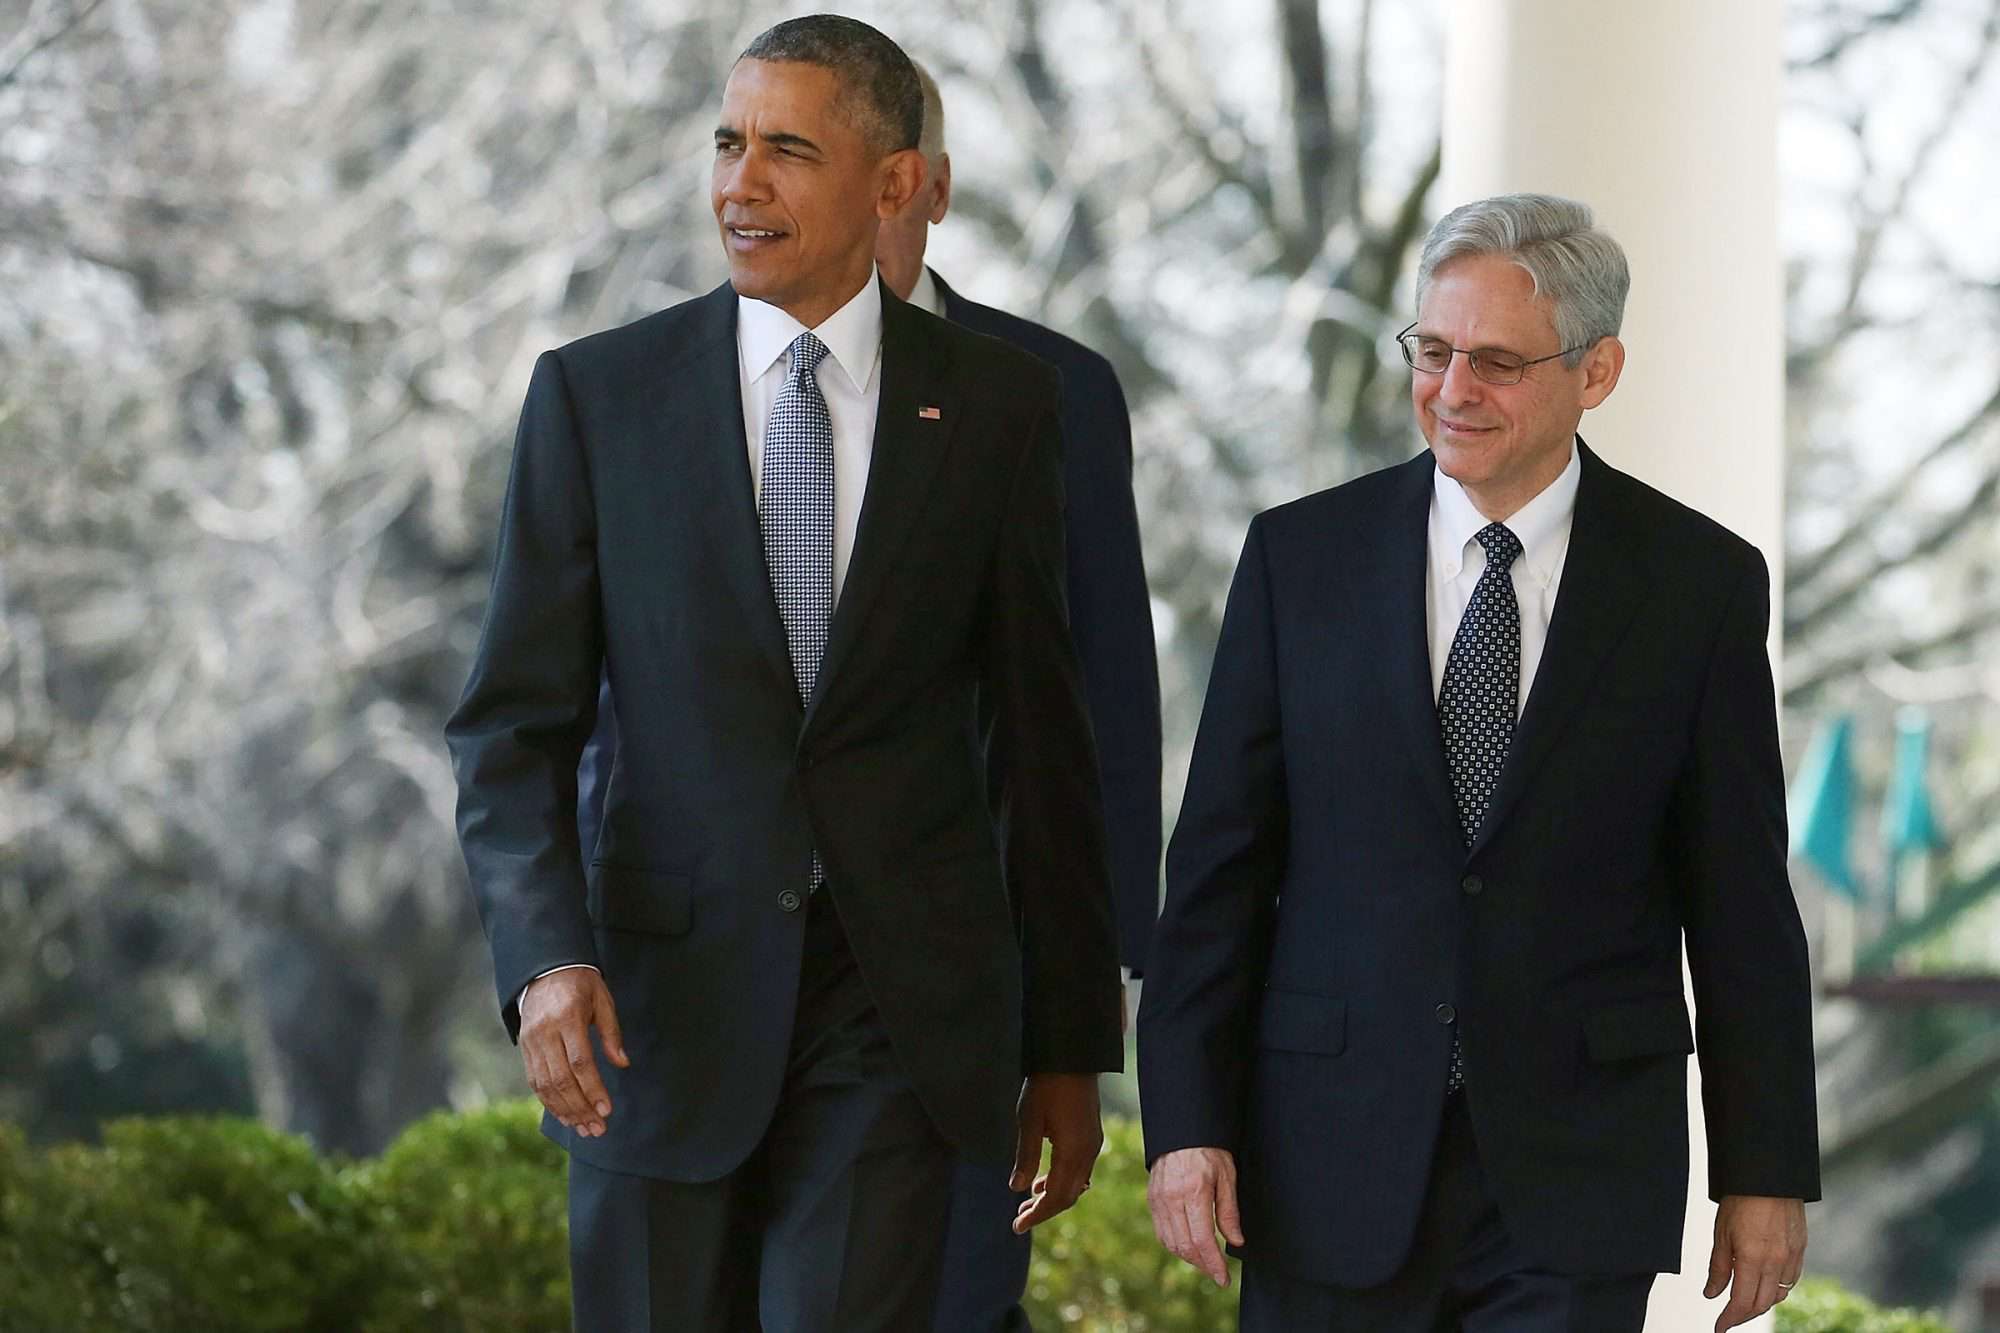 President Obama Announces Merrick Garland As His Nominee To The Supreme Court